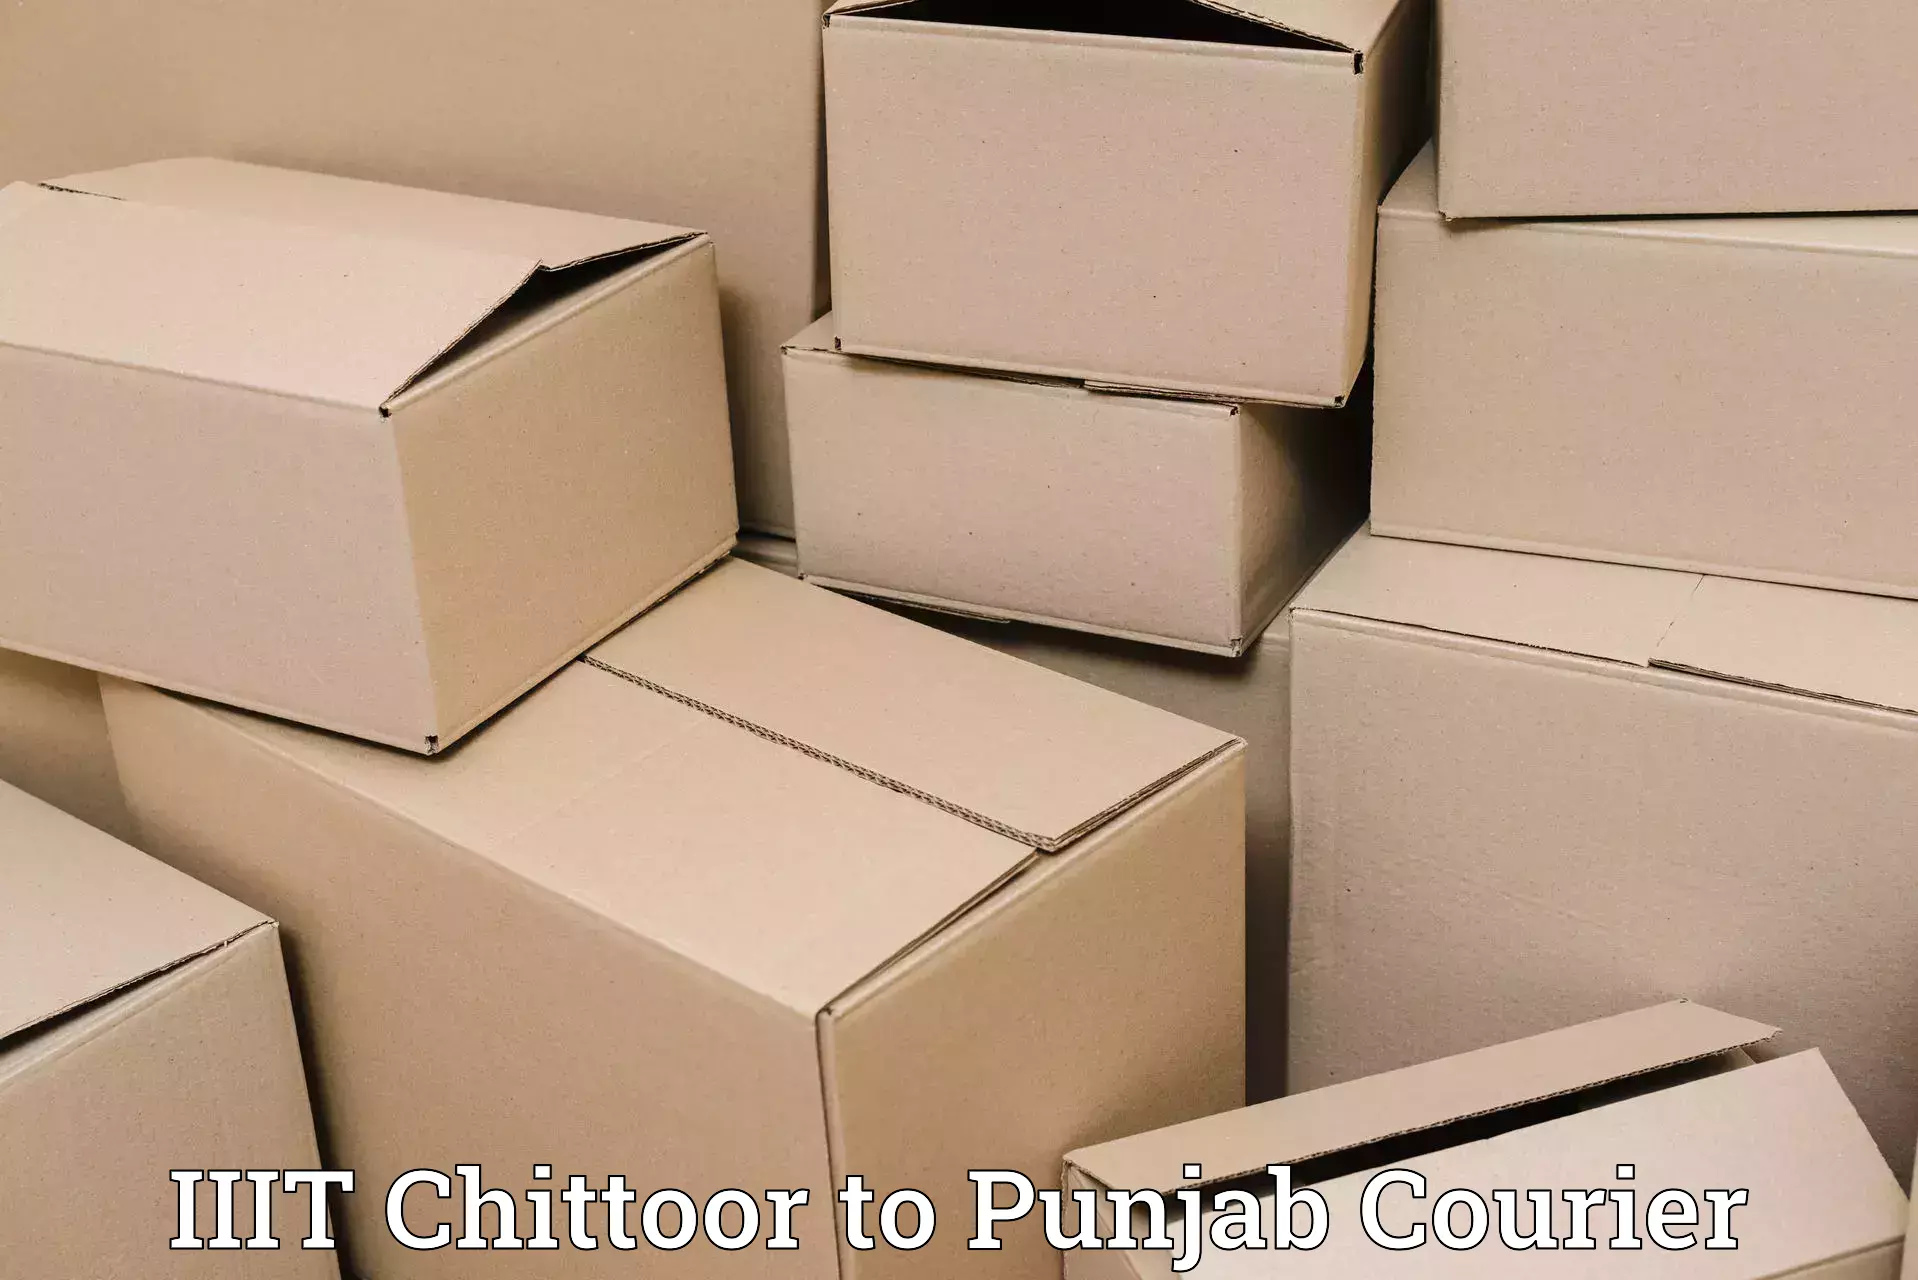 Customer-oriented courier services IIIT Chittoor to Sangrur